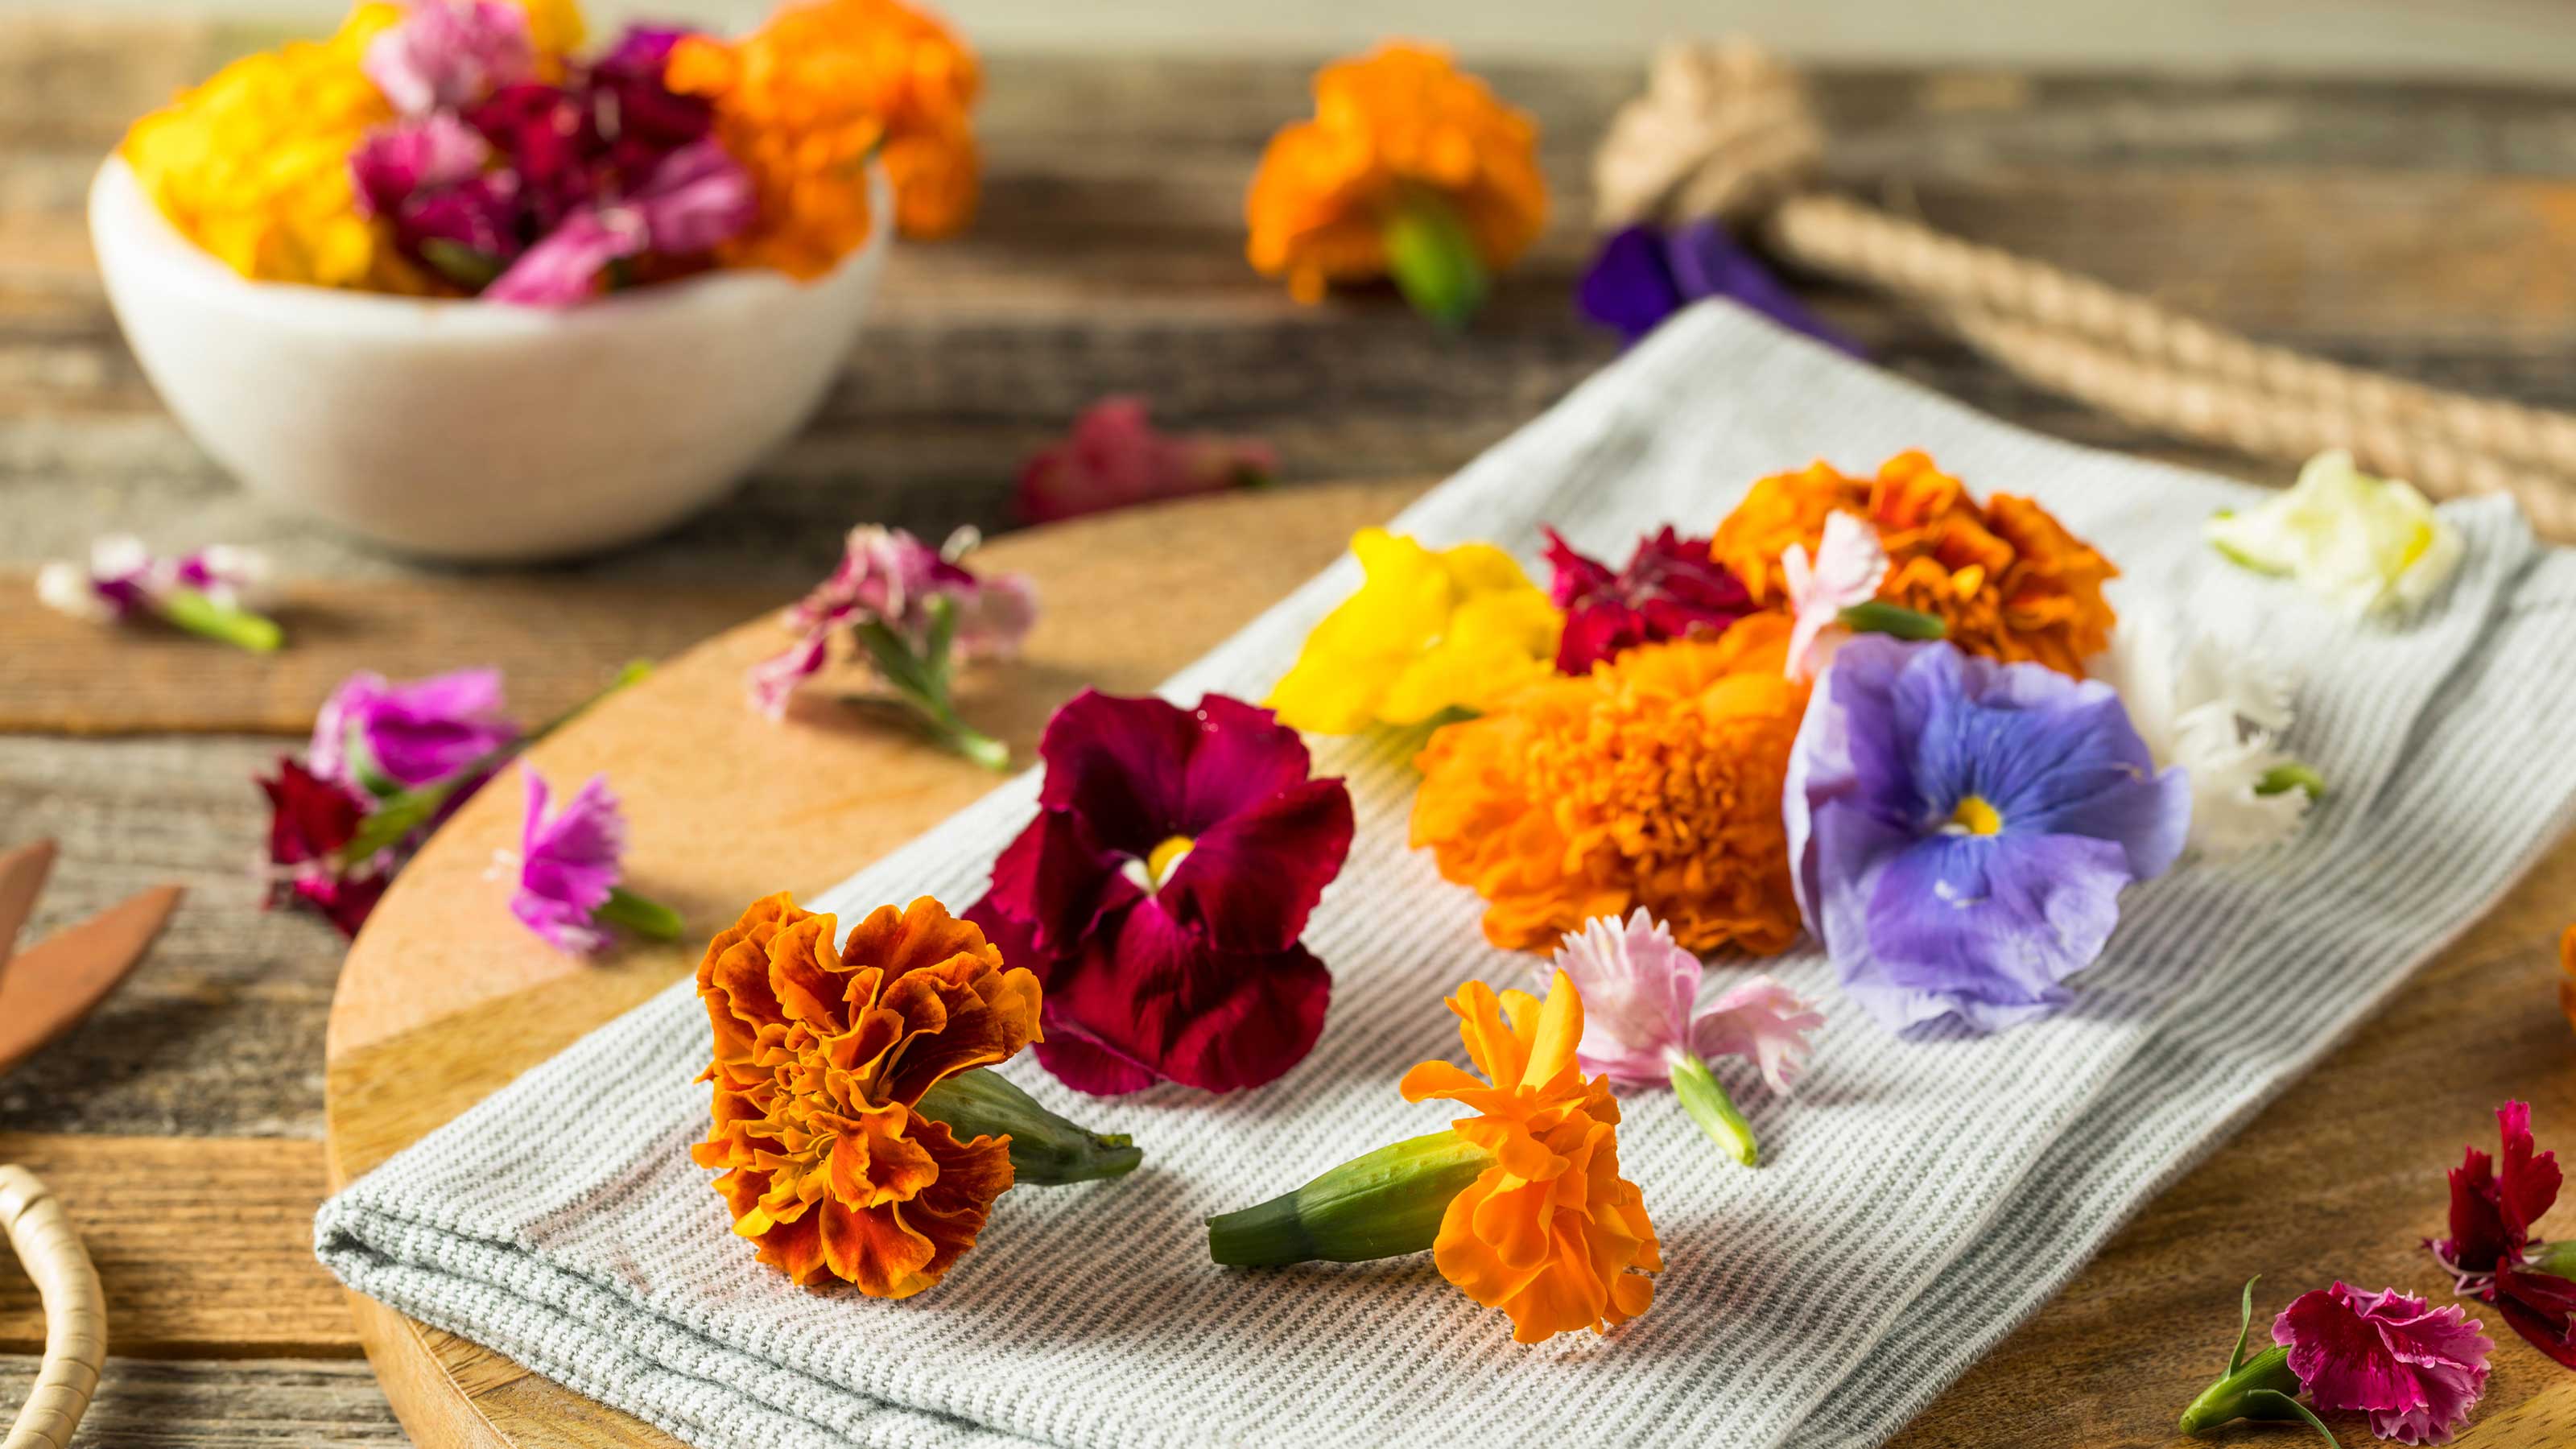 How to Crystallize Edible Flowers for Beautiful Dessert Decorations, Recipe